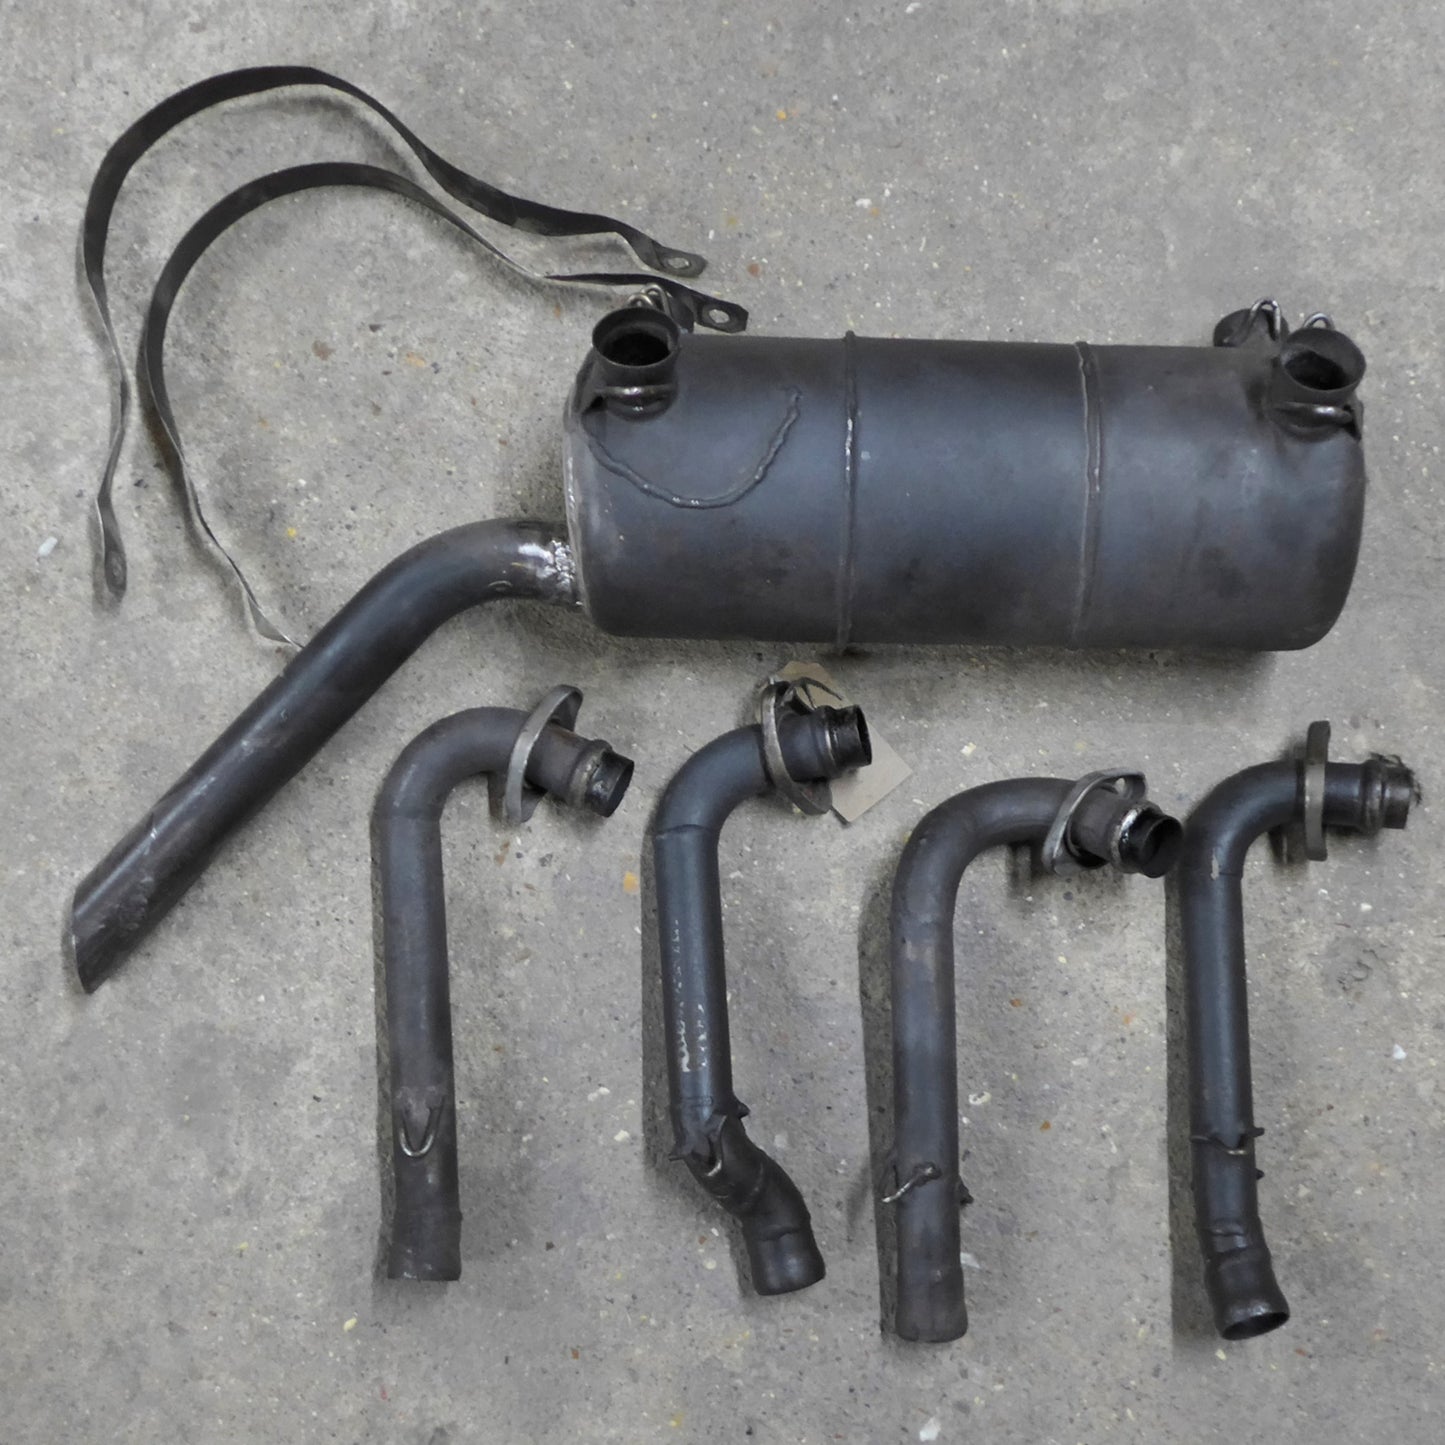 Exhaust System - Rotax 912 UL (A/R)